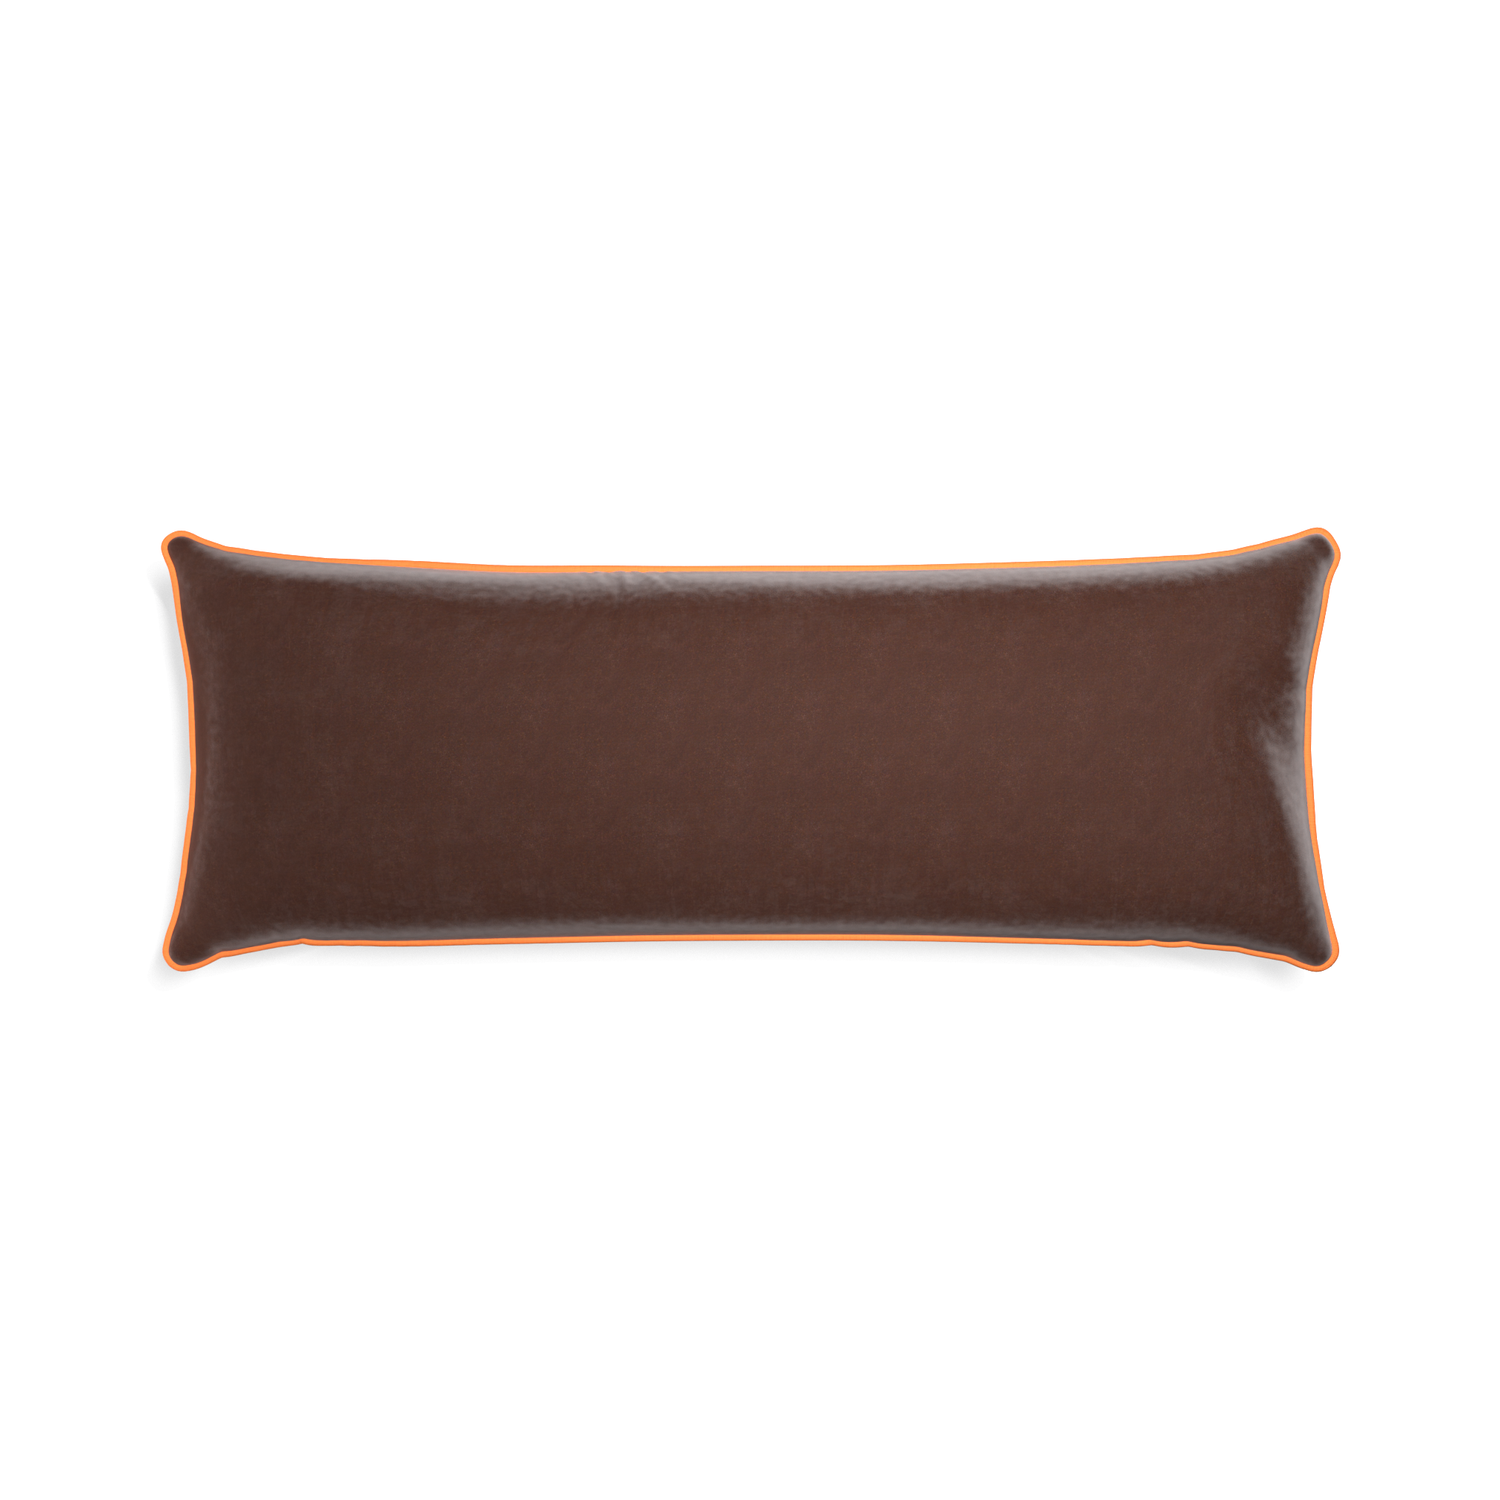 Xl-lumbar walnut velvet custom pillow with clementine piping on white background